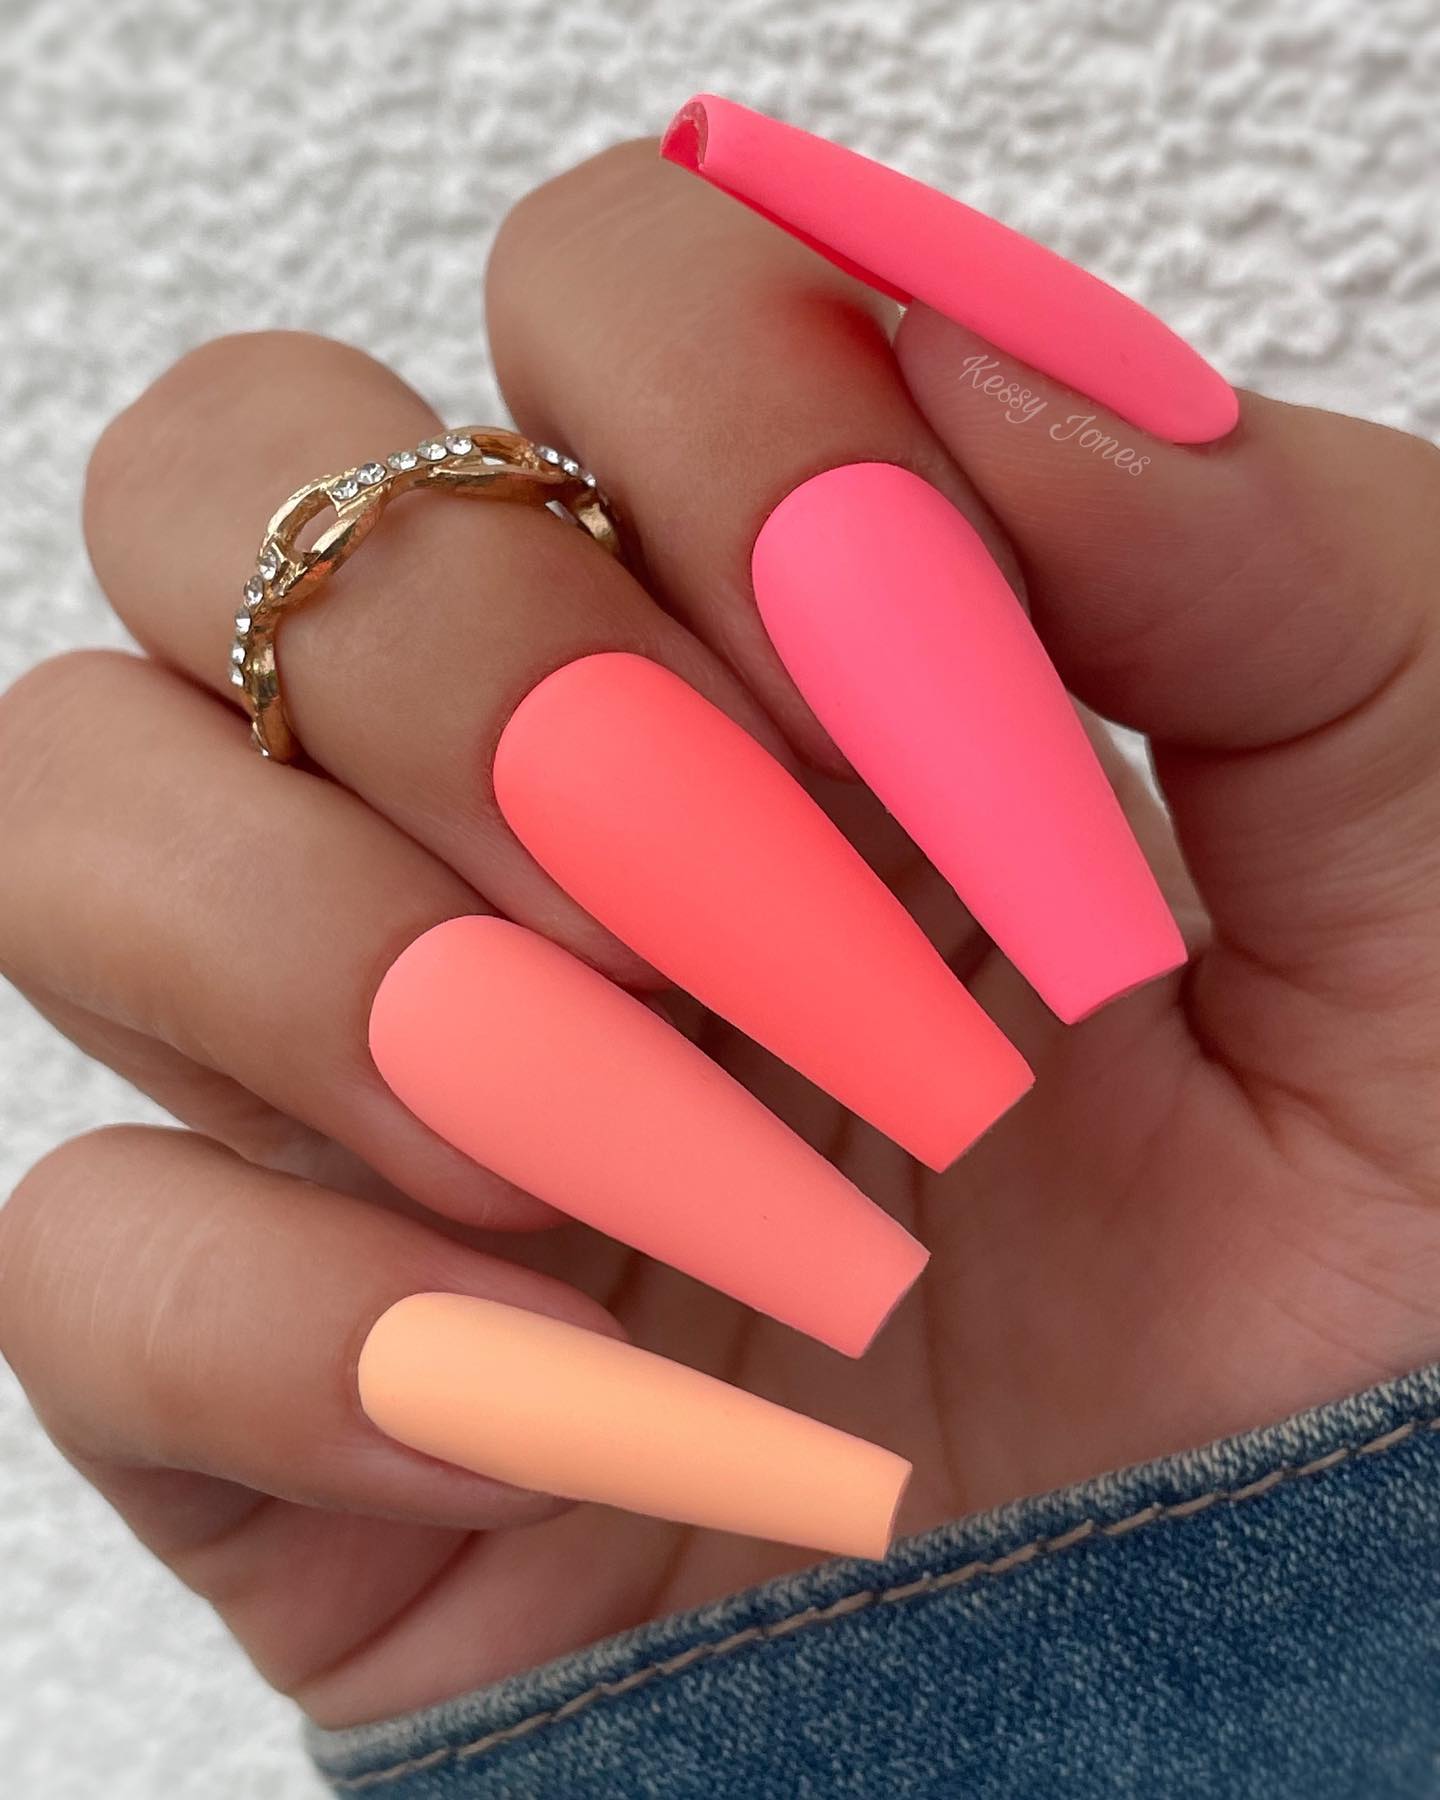 Matte nails are always gorgeous! They are so chic, and they last longer than regular nail polish. By using vibrant colors like the one above, you can stand out easily. A color palette which starts from neon pink and goes on with lighter shades of pink and orange is all you need to shine.